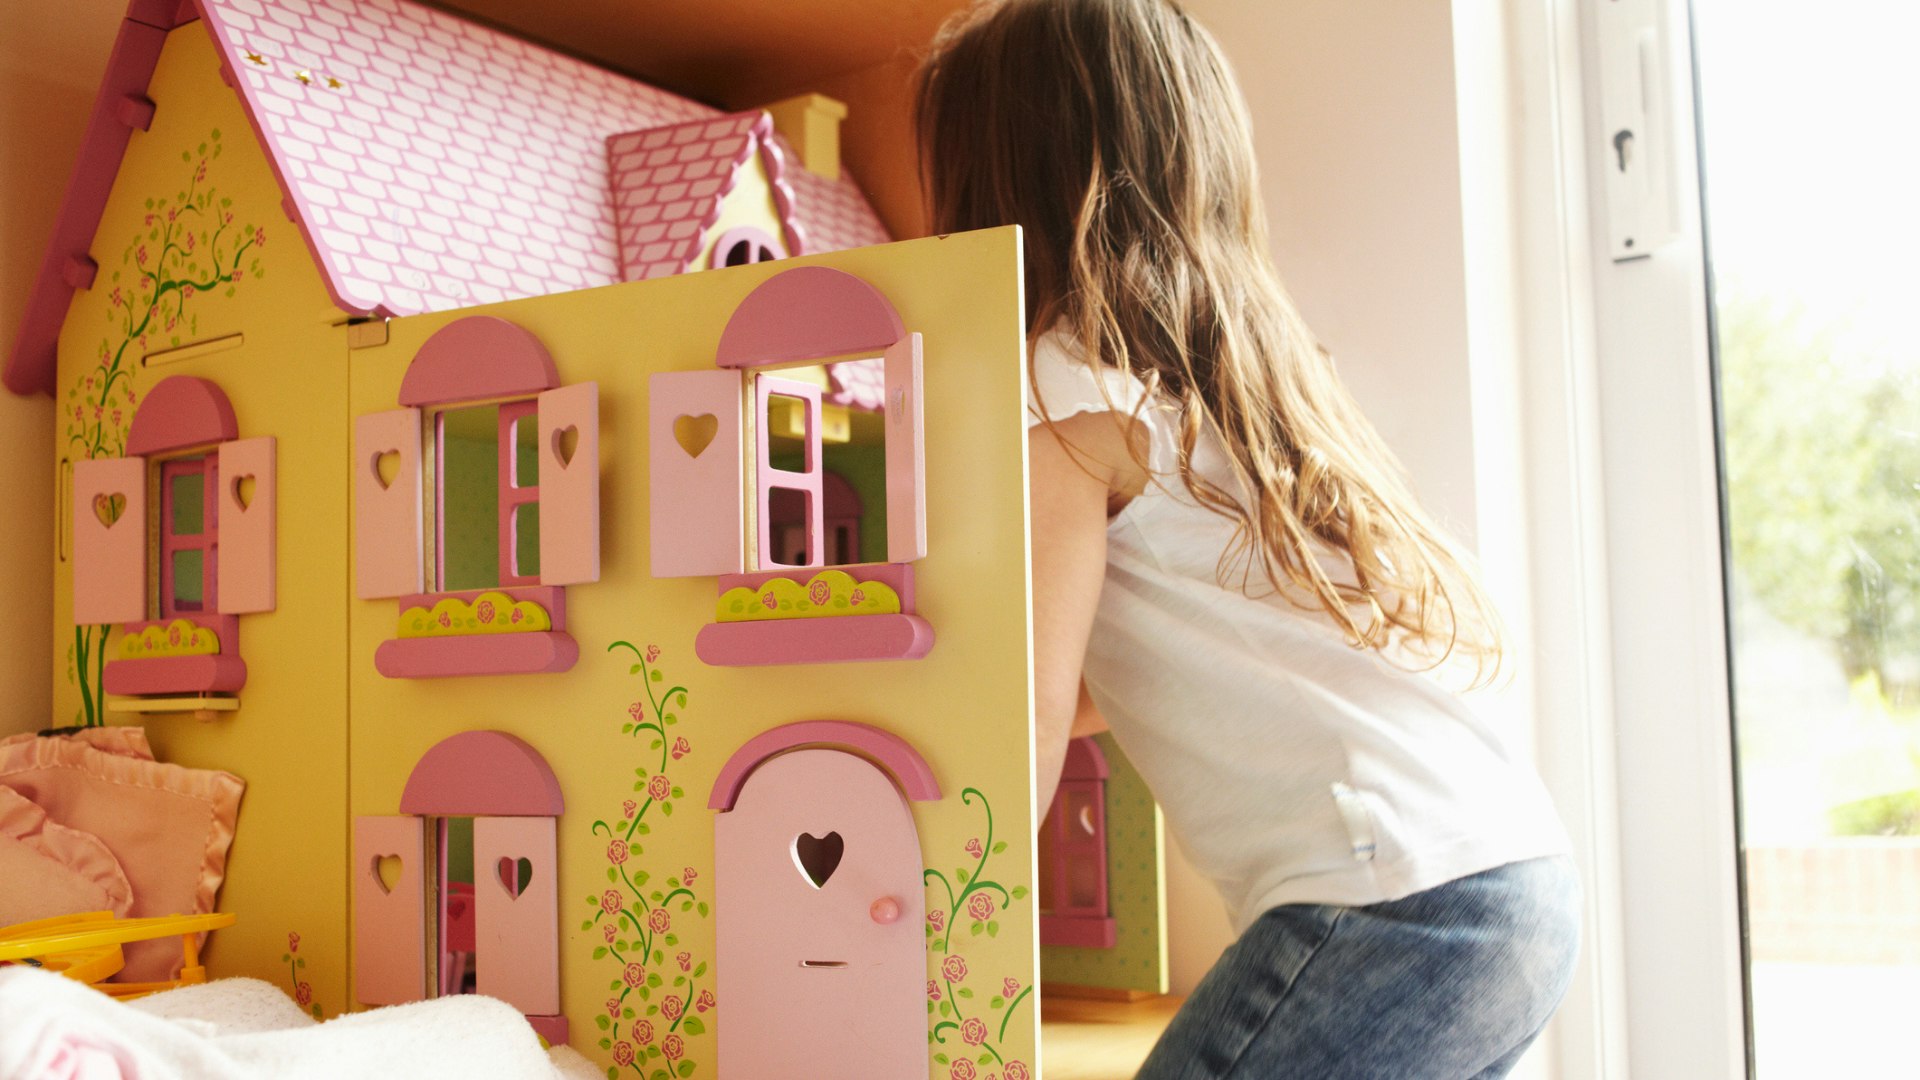 Pink & Purple 16-Piece Doll House Play Set With Dolls